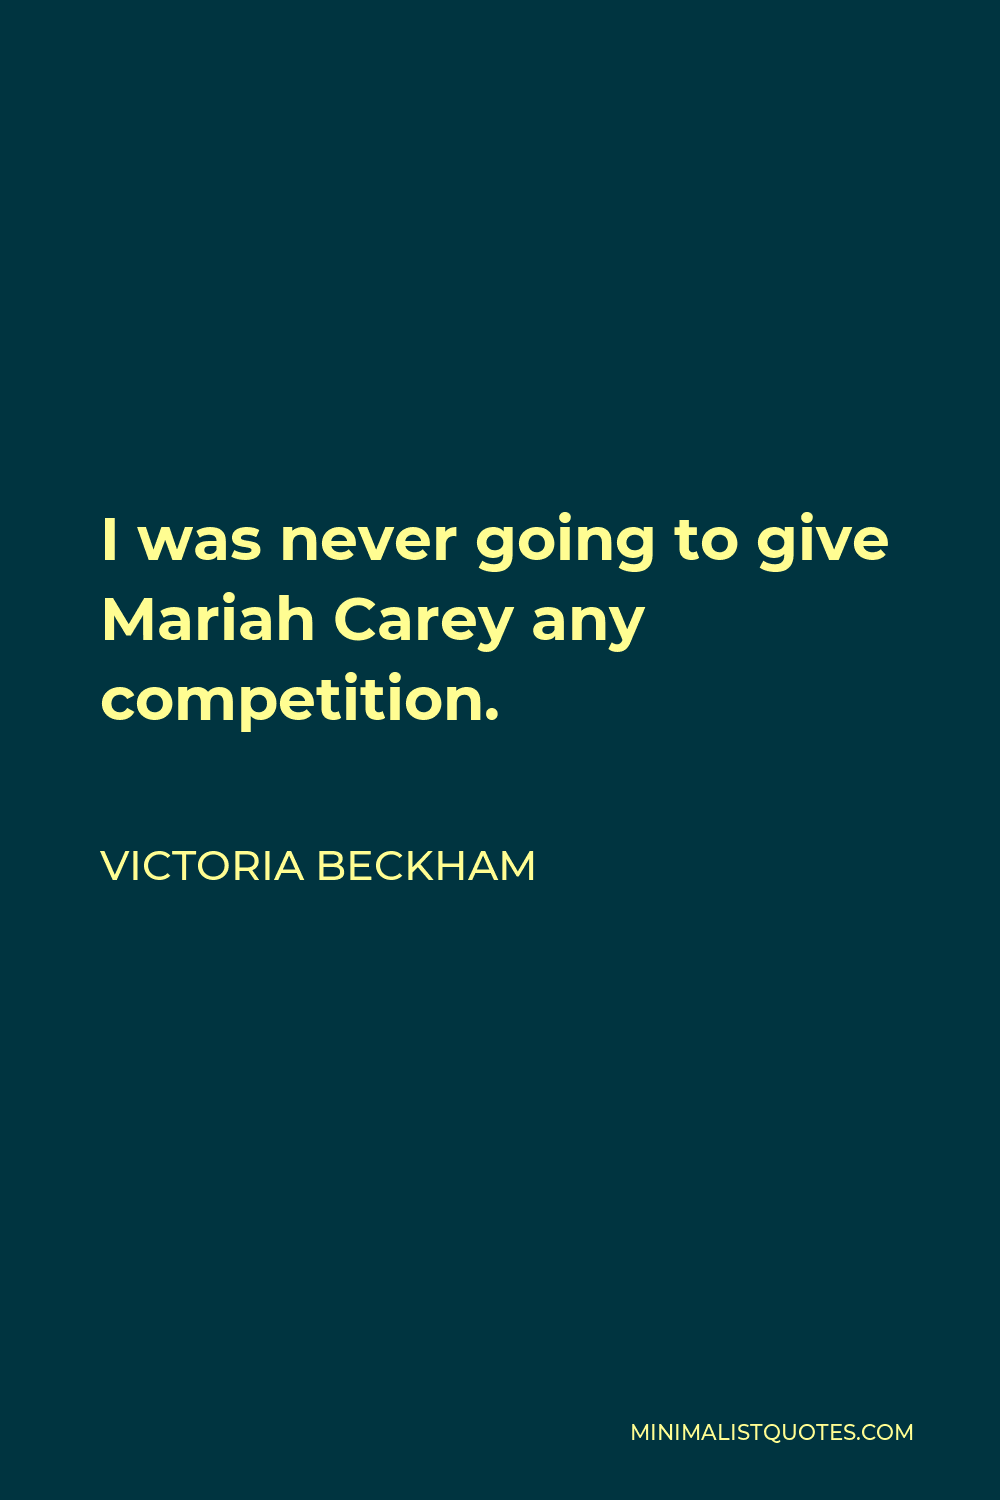 Victoria Beckham Quote - I was never going to give Mariah Carey any competition.